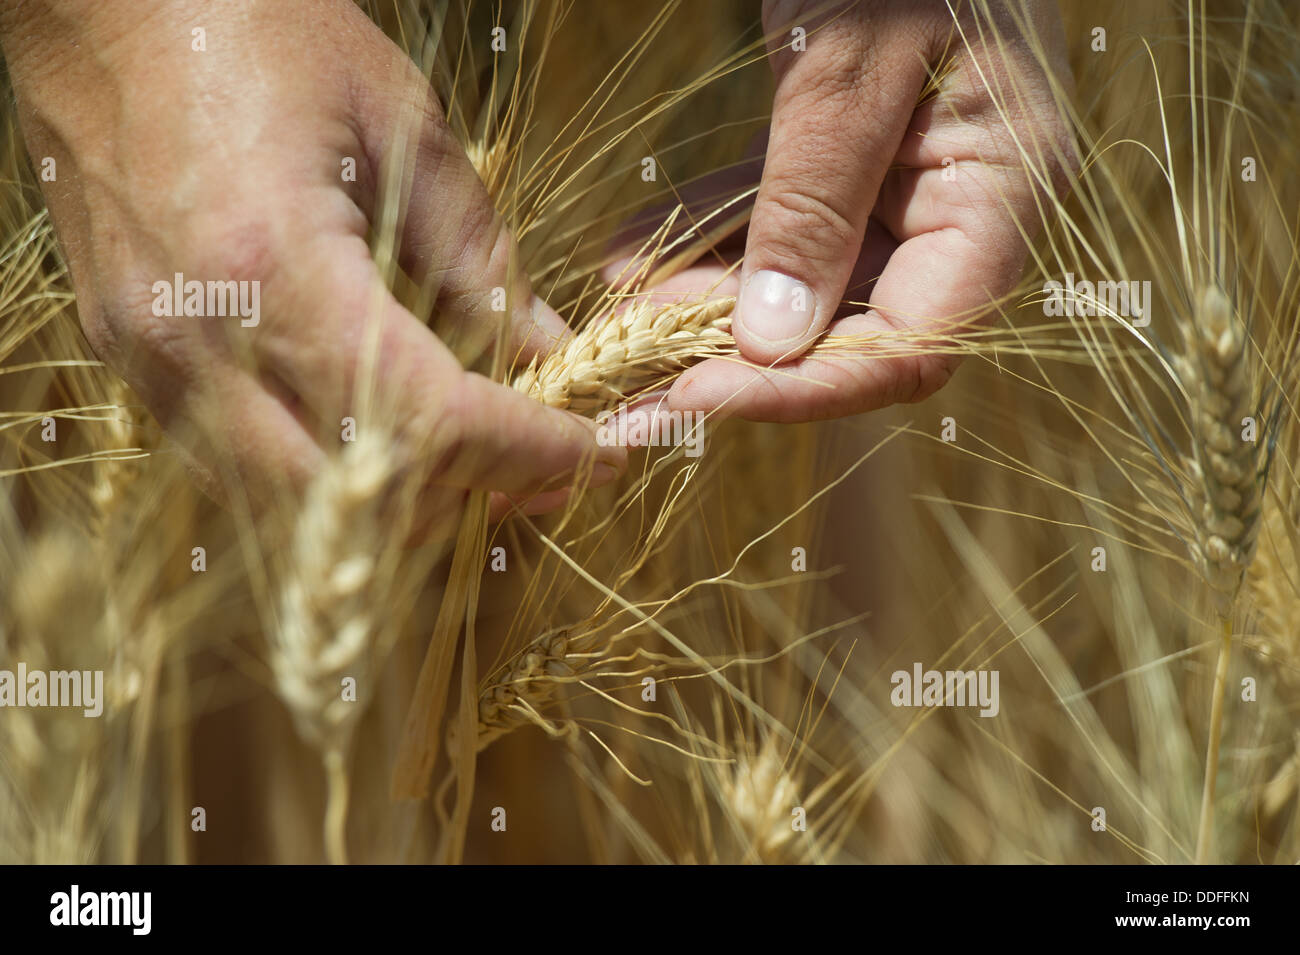 Farmer Holding Wheat Banque D'Images